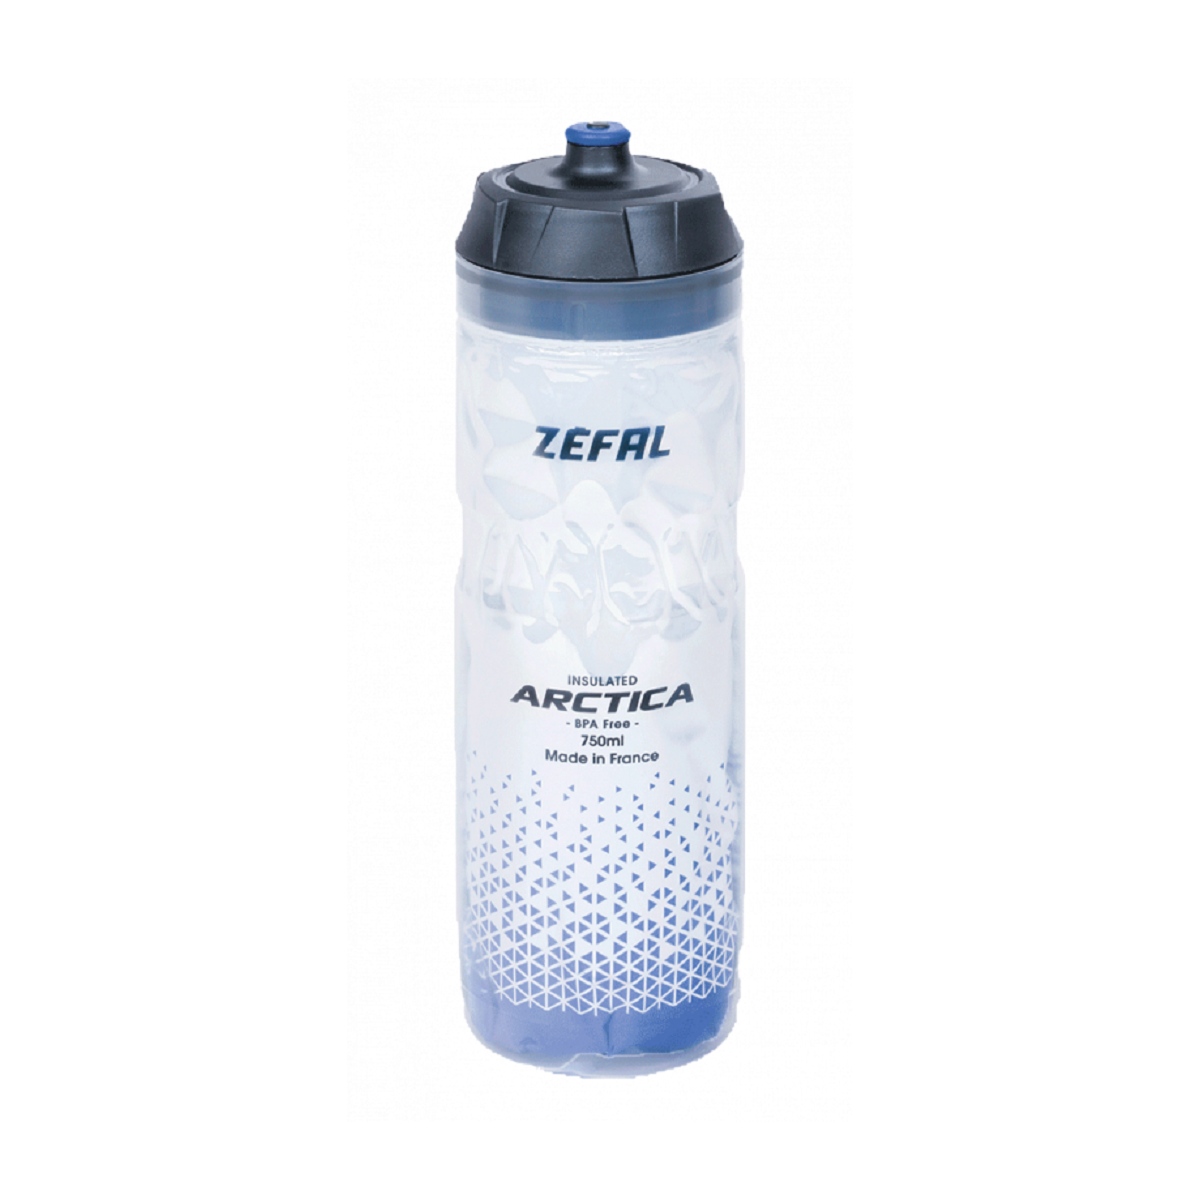 ZEFAL ARCTICA 75 750ML thermo bottle blue / grey